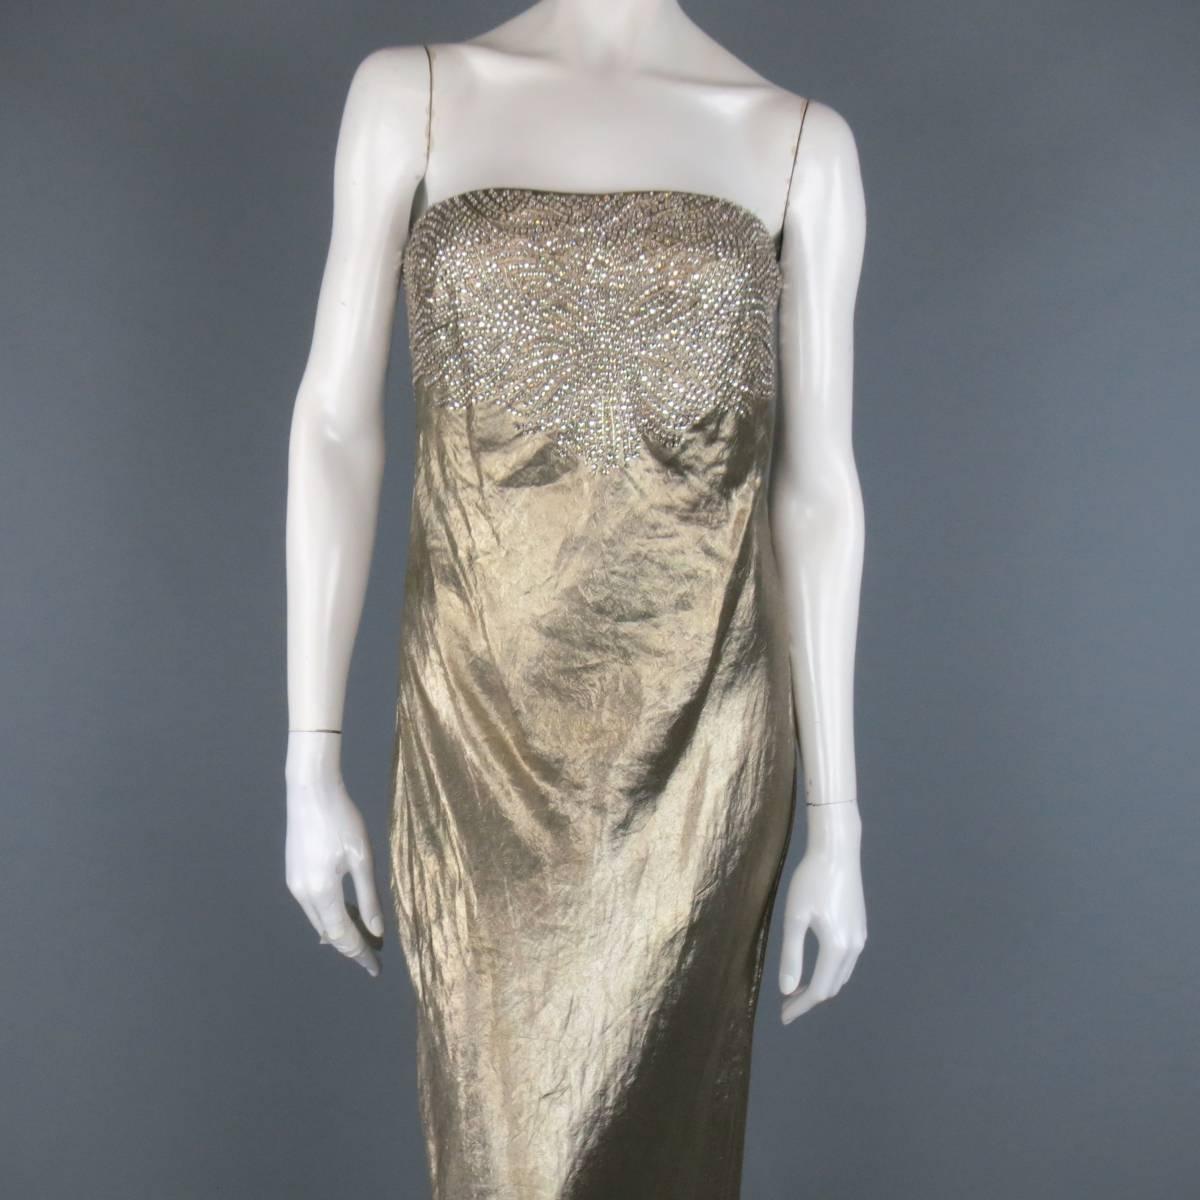 This stunning RALPH LAUREN COLLECTION strapless evening gown comes in a textured metallic silk blend material and features a built in bustier and beaded rhinestoned panel. Minor discoloration on back. Made in USA.
 
New with Tags.
Marked:
 
Bust: 